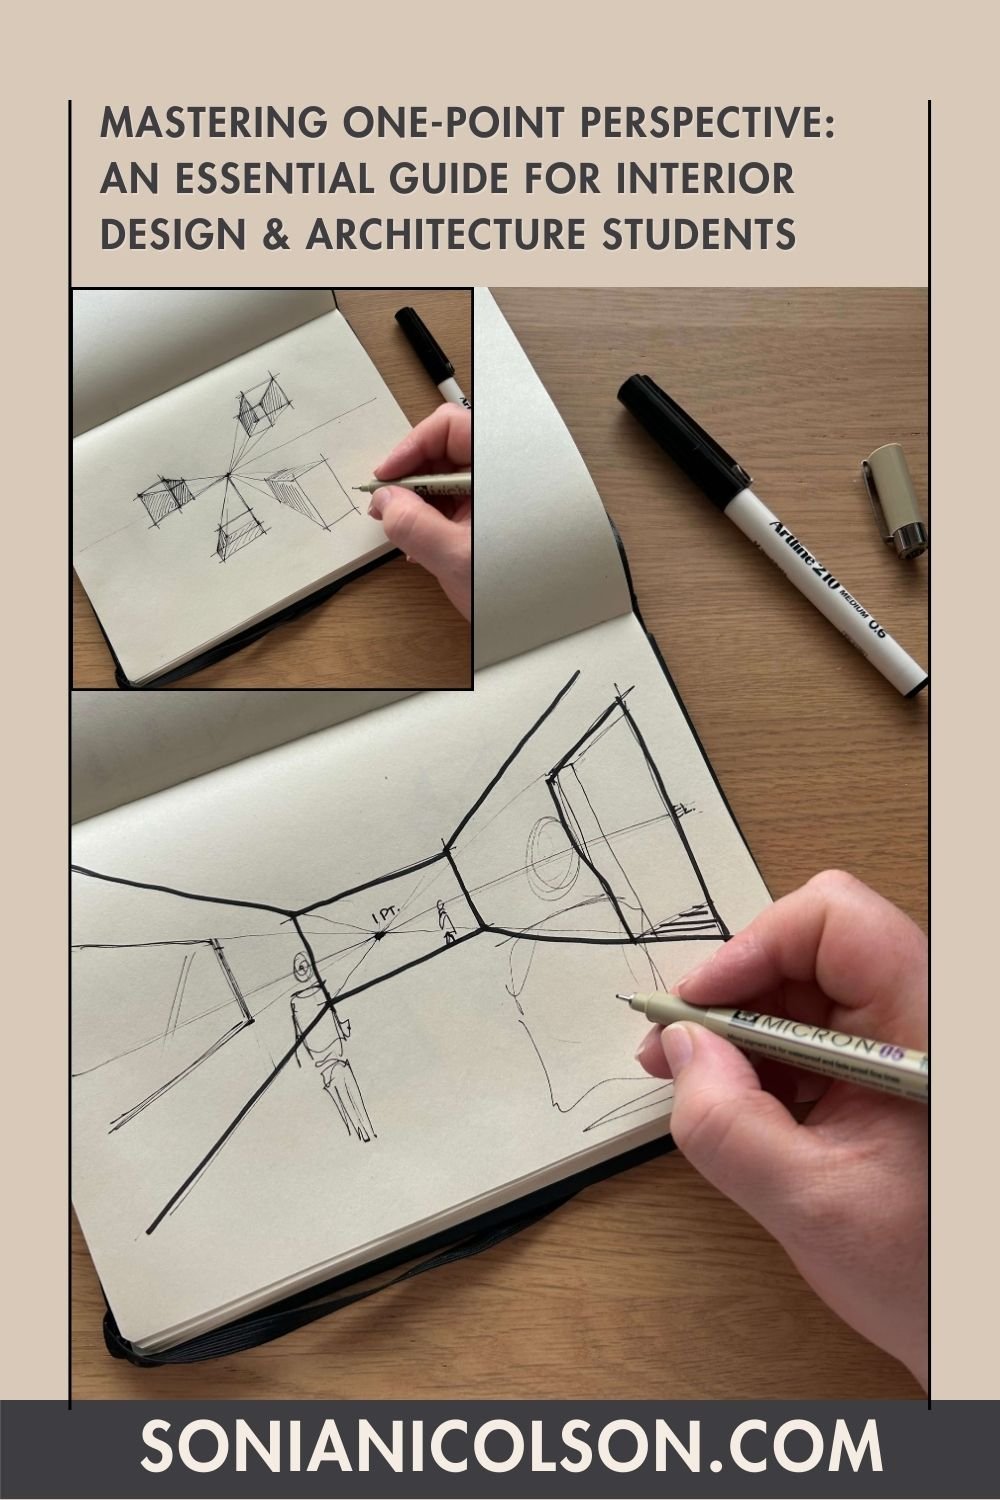 Mastering 1 point perspective pinterest pin.jpg